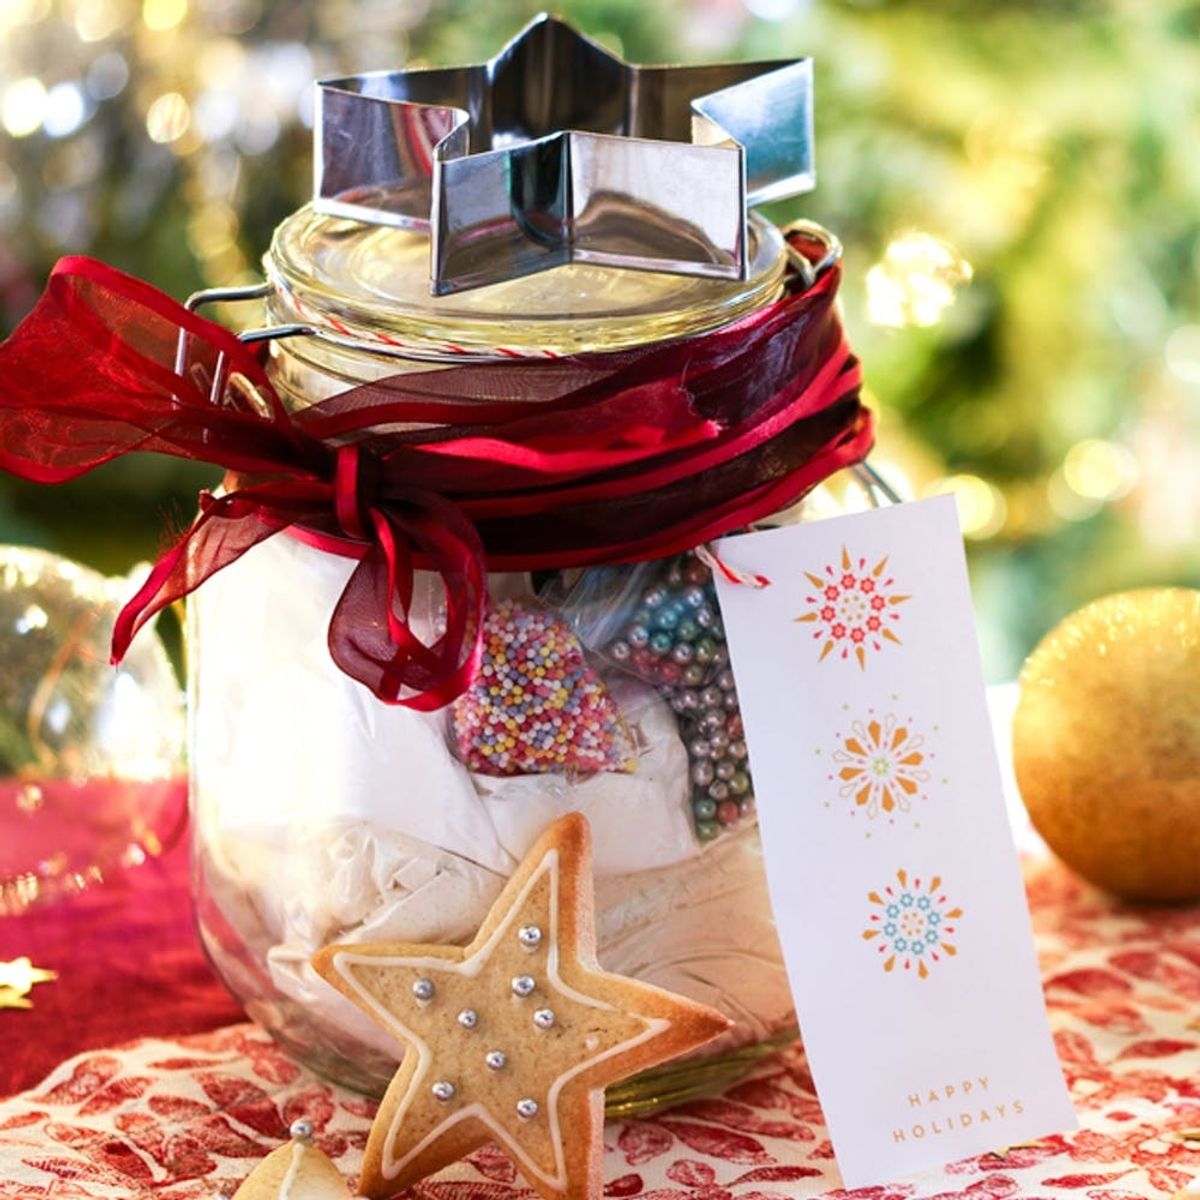 A Clever Way to Upgrade Your “Cookies in a Jar” Gift This Season